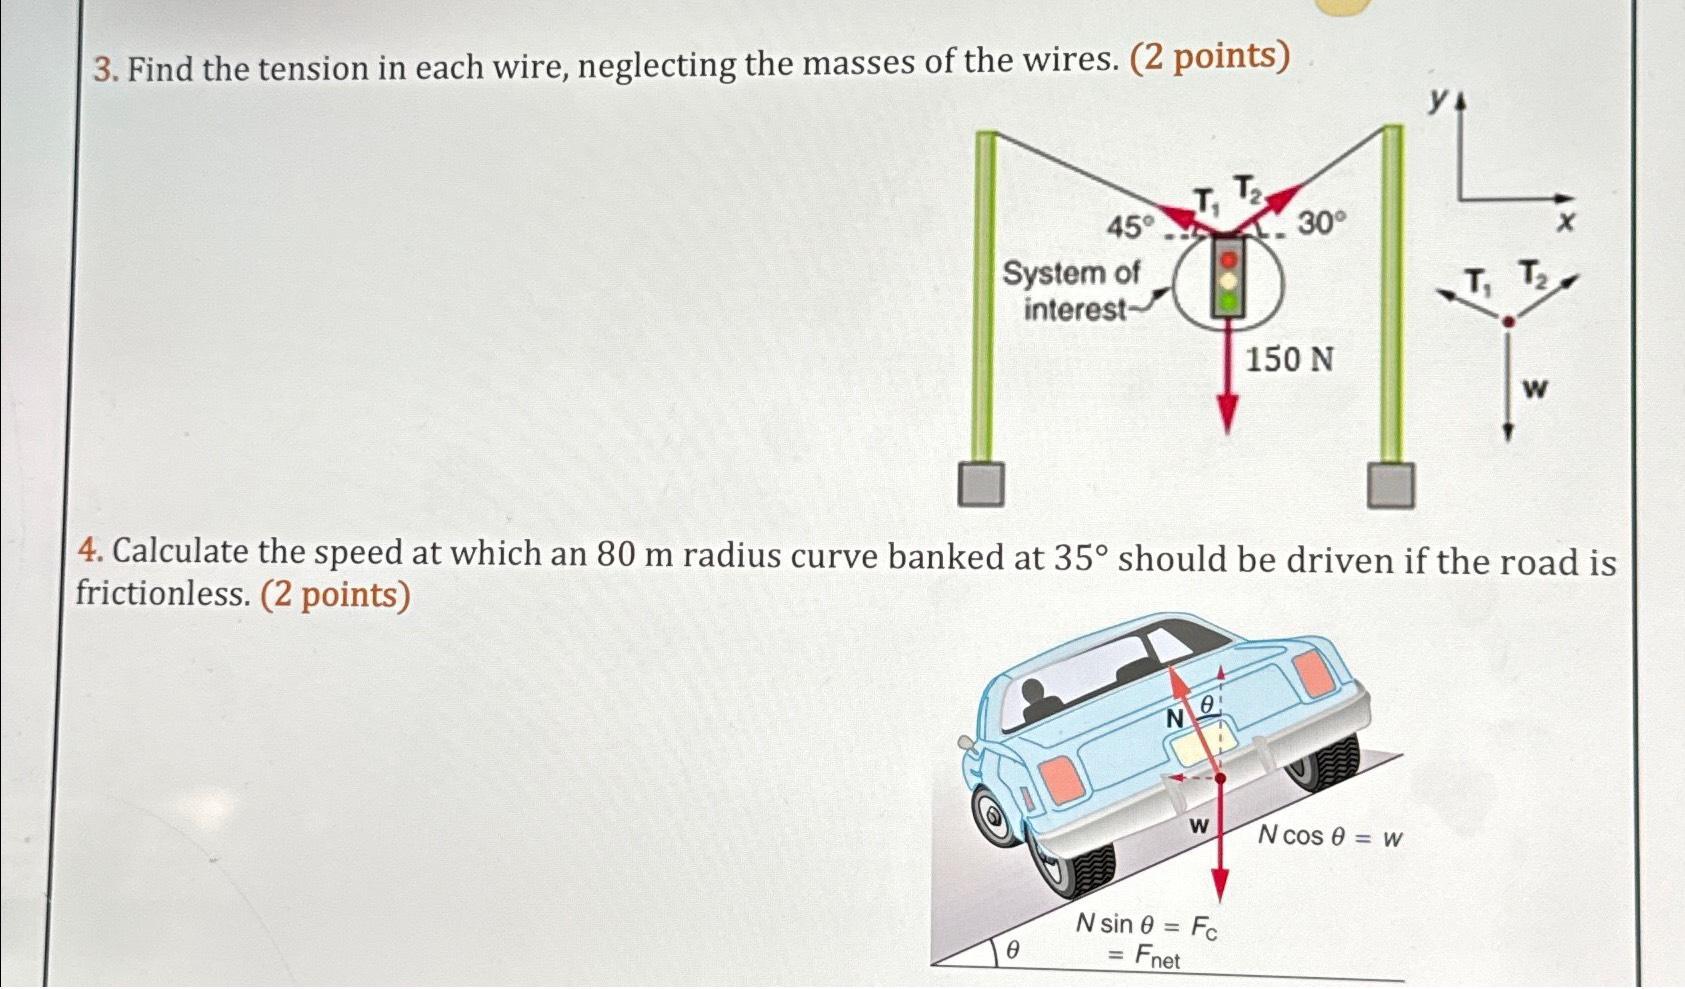 3. Find the tension in each wire, neglecting the masses of the wires. (2 points) 45 System of interest- 0 NO